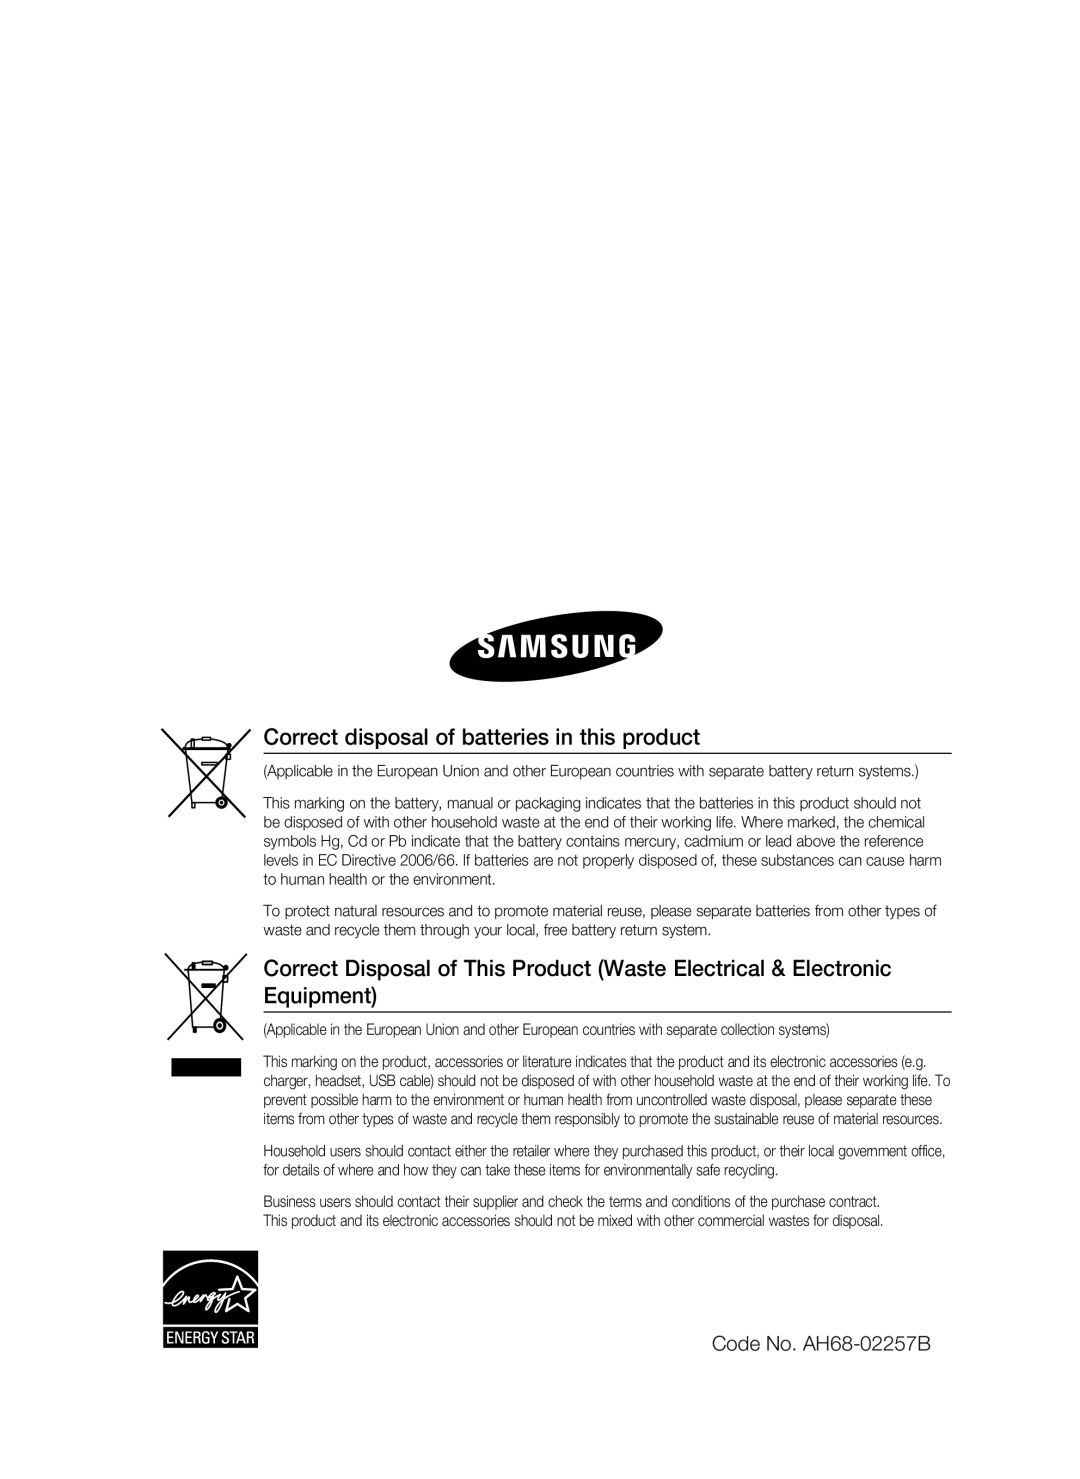 Samsung HT-C5200 user manual Correct disposal of batteries in this product, Code No. AH68-02257B 